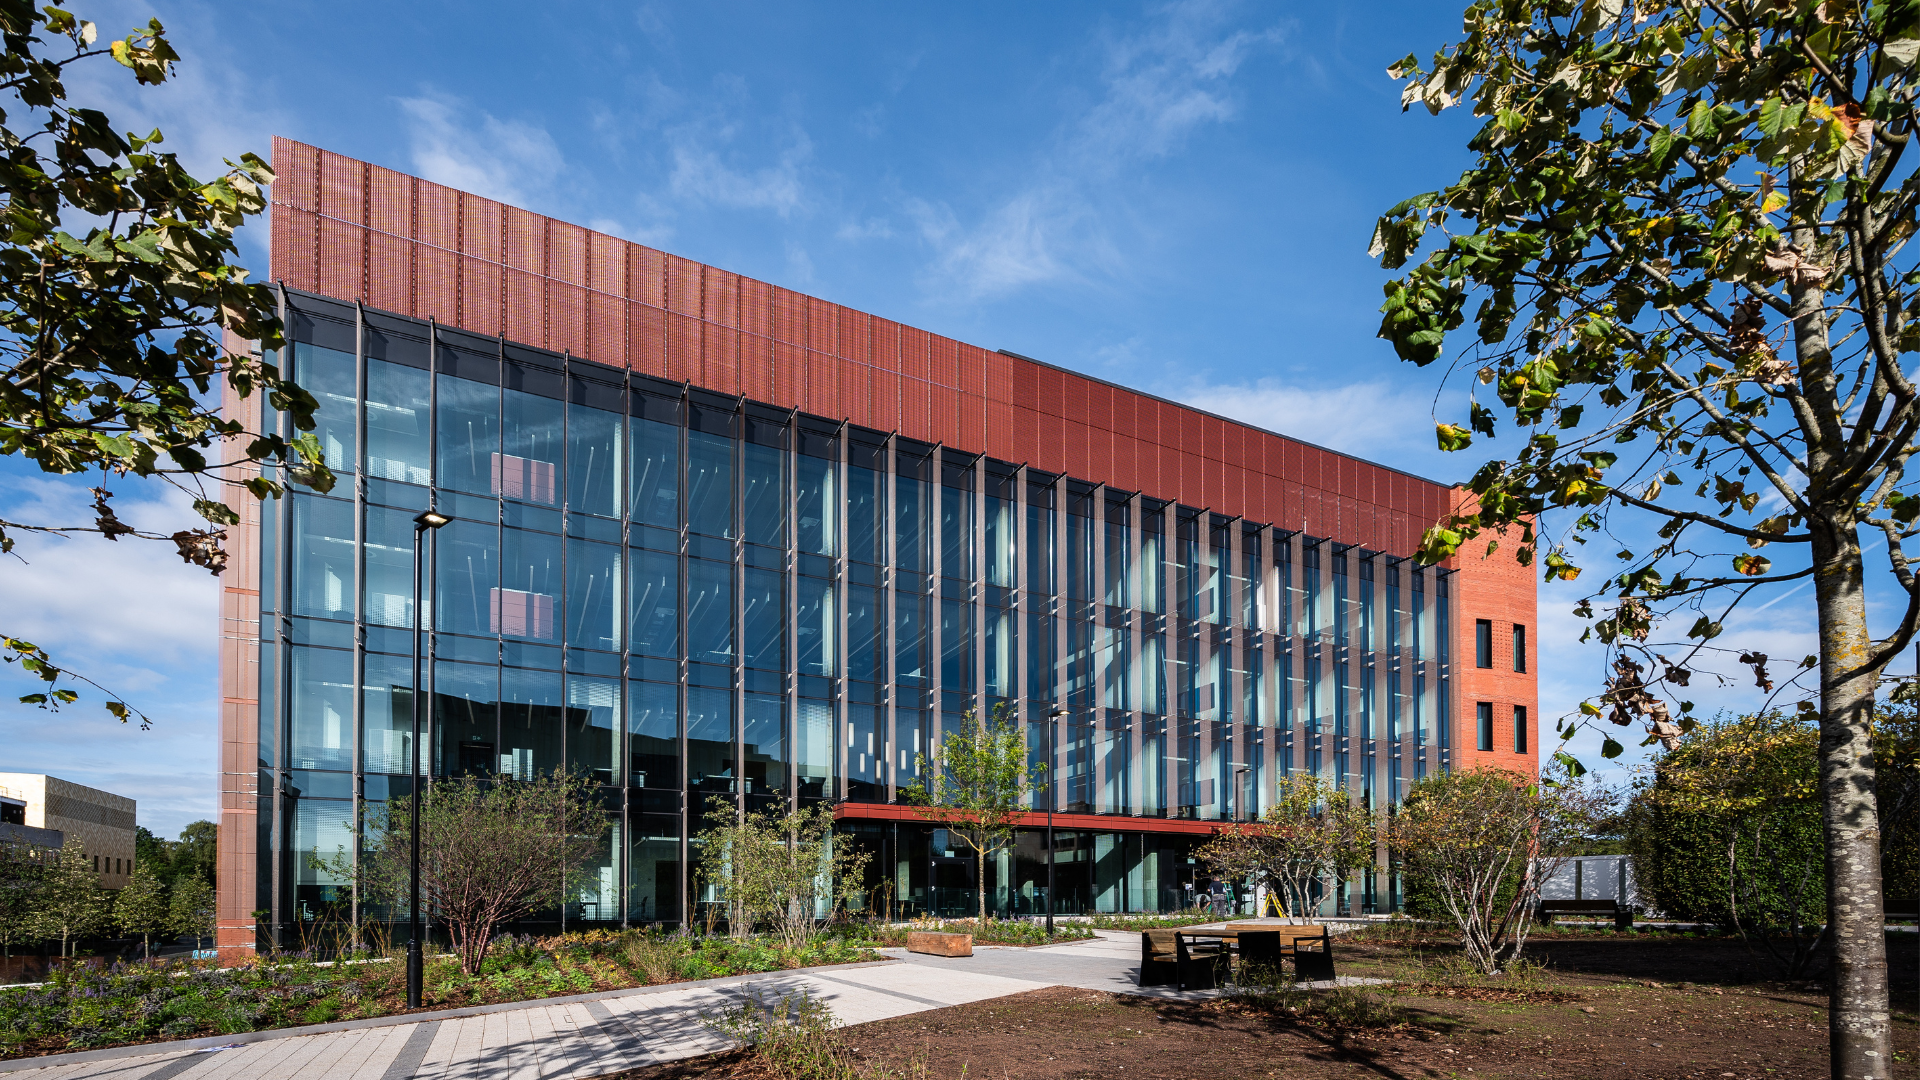 Photo of the new Molecular Sciences Building on the University of Birmingham campus.